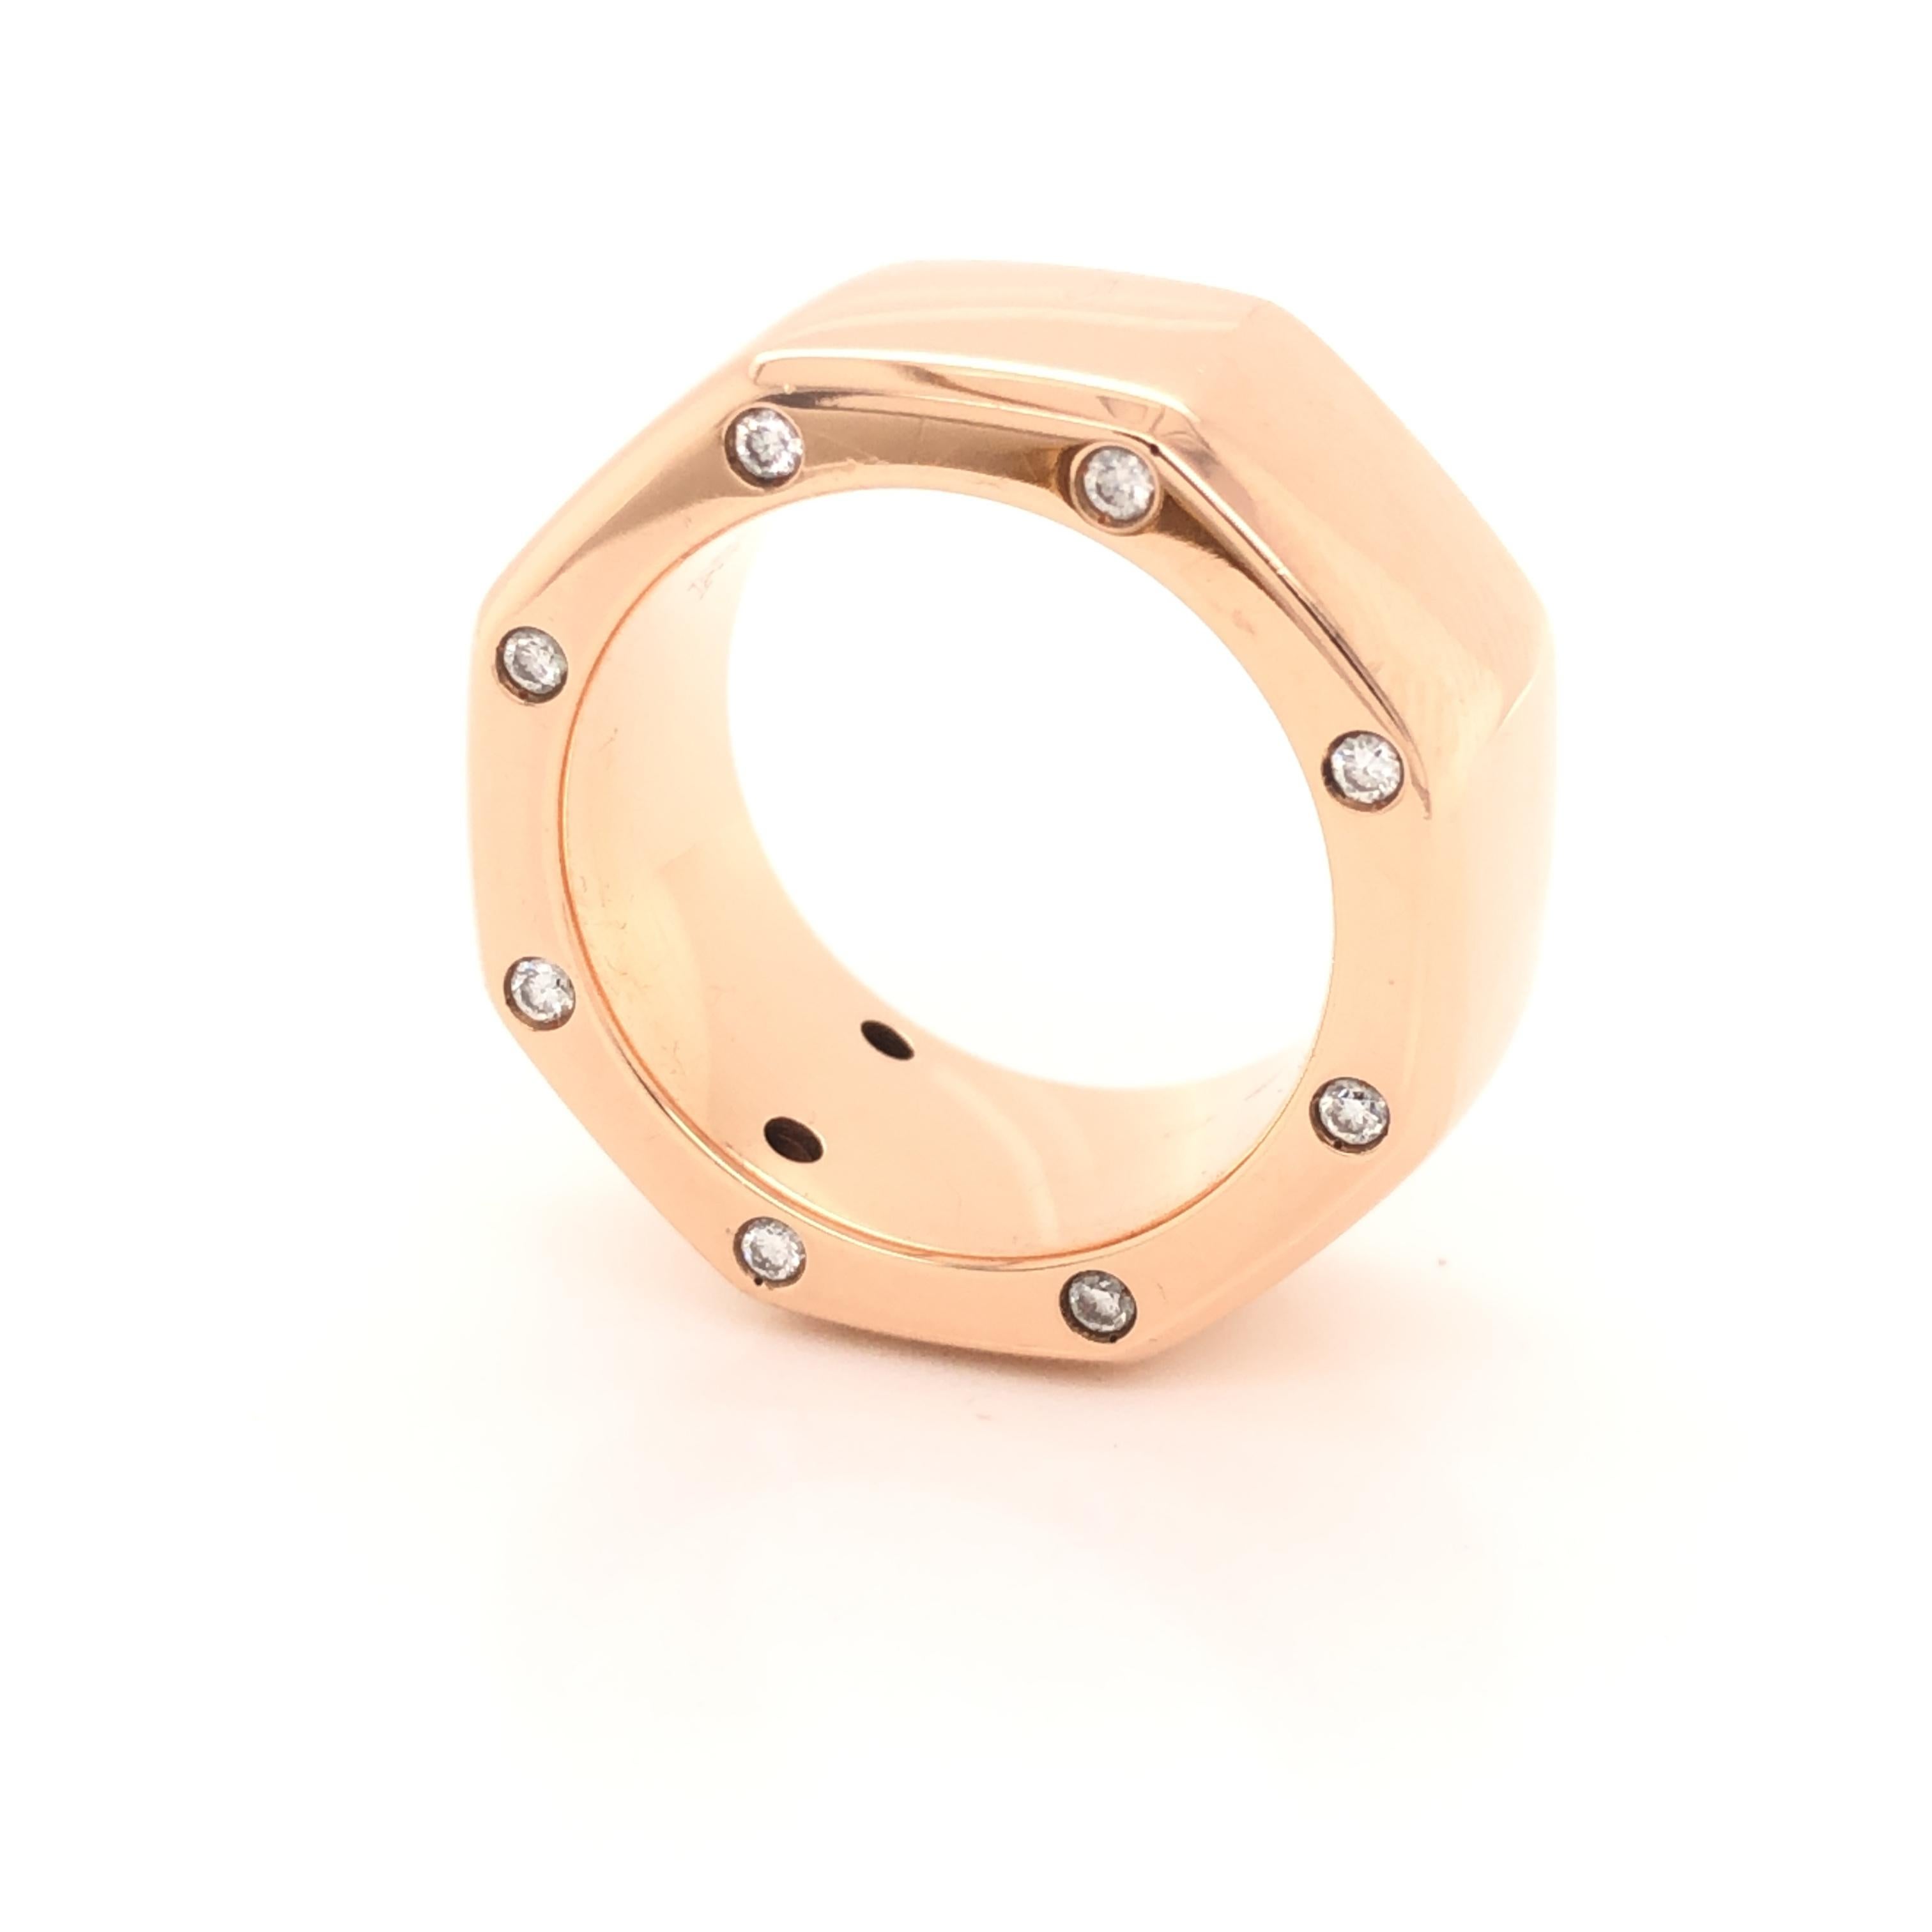 Beautiful wide band ring crafted by Audemars Piguet in the 